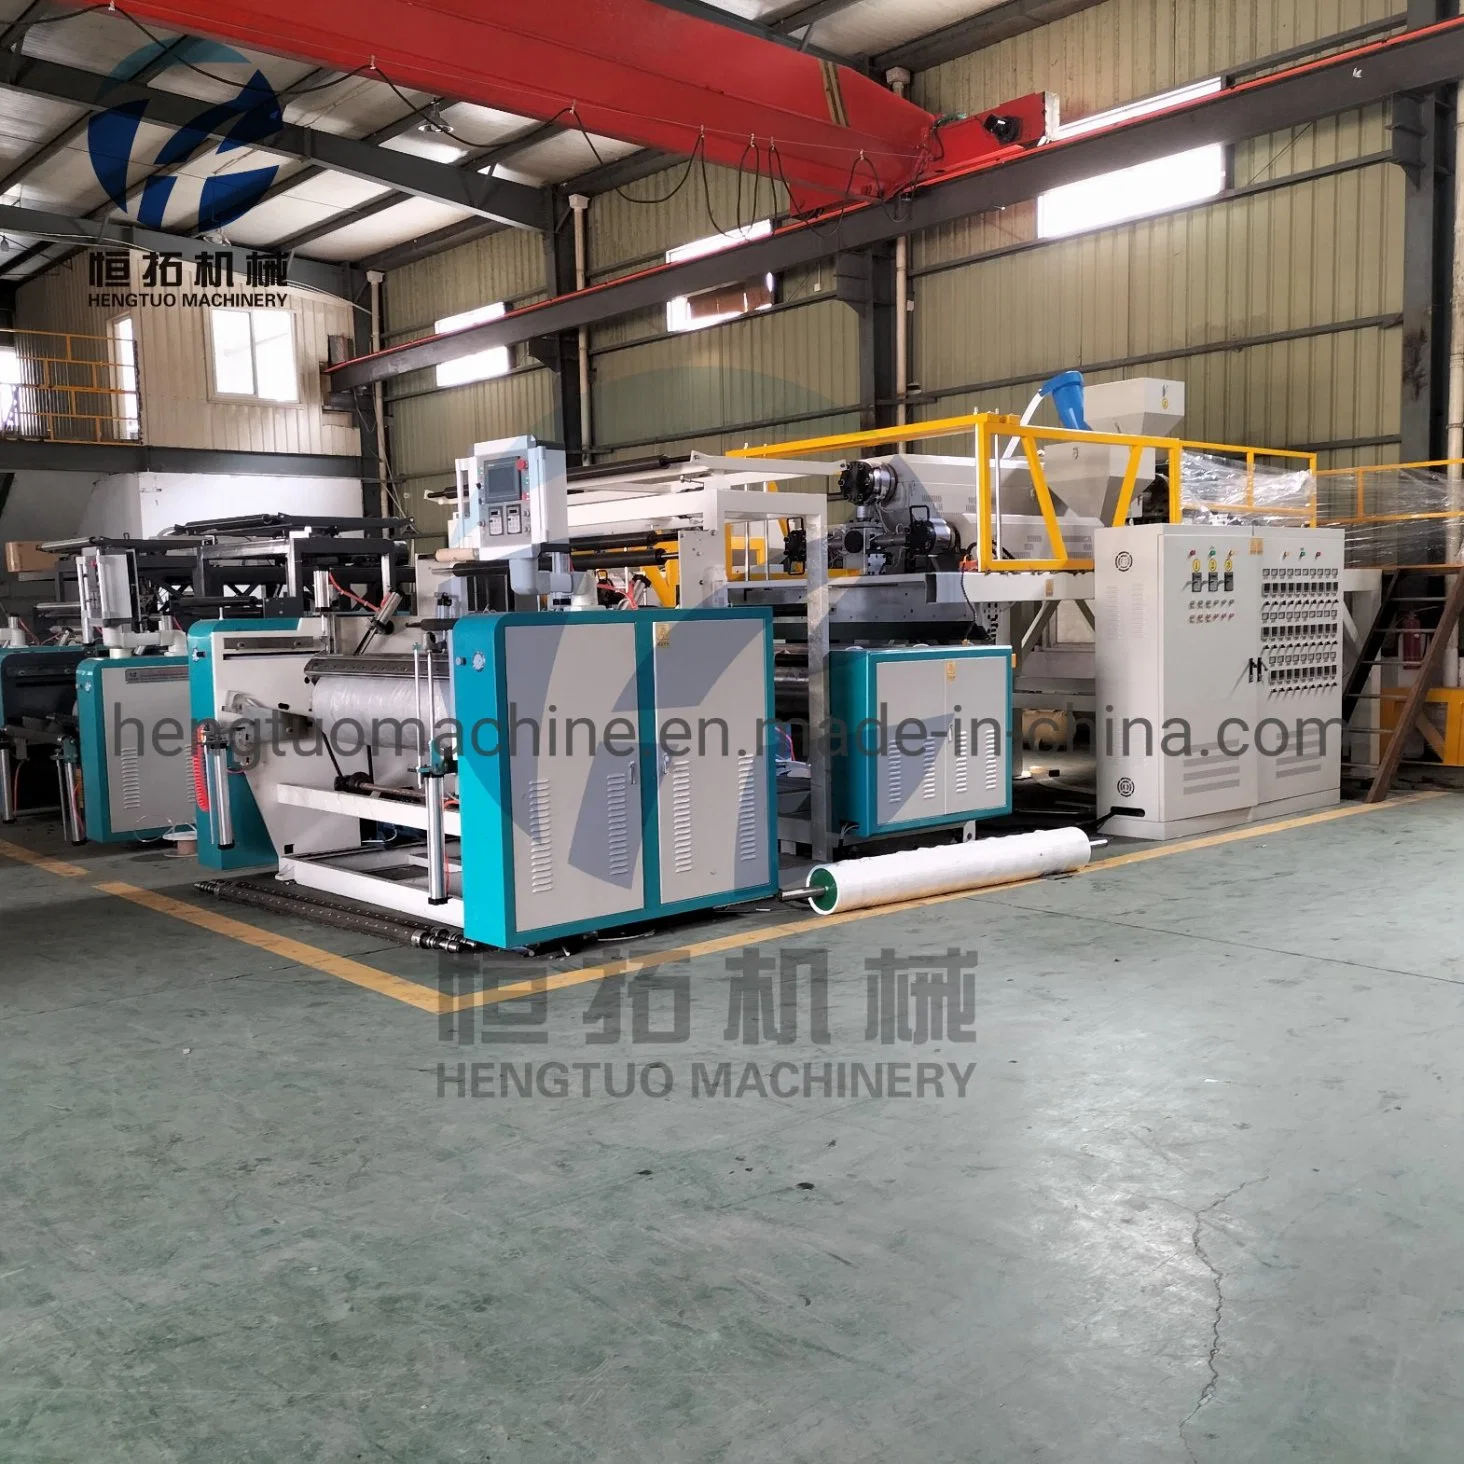 Hengtuo PE 1500mm 3 Layer Stretch Package Film Machine for Food Protective Film Plastic Tensile Membranes